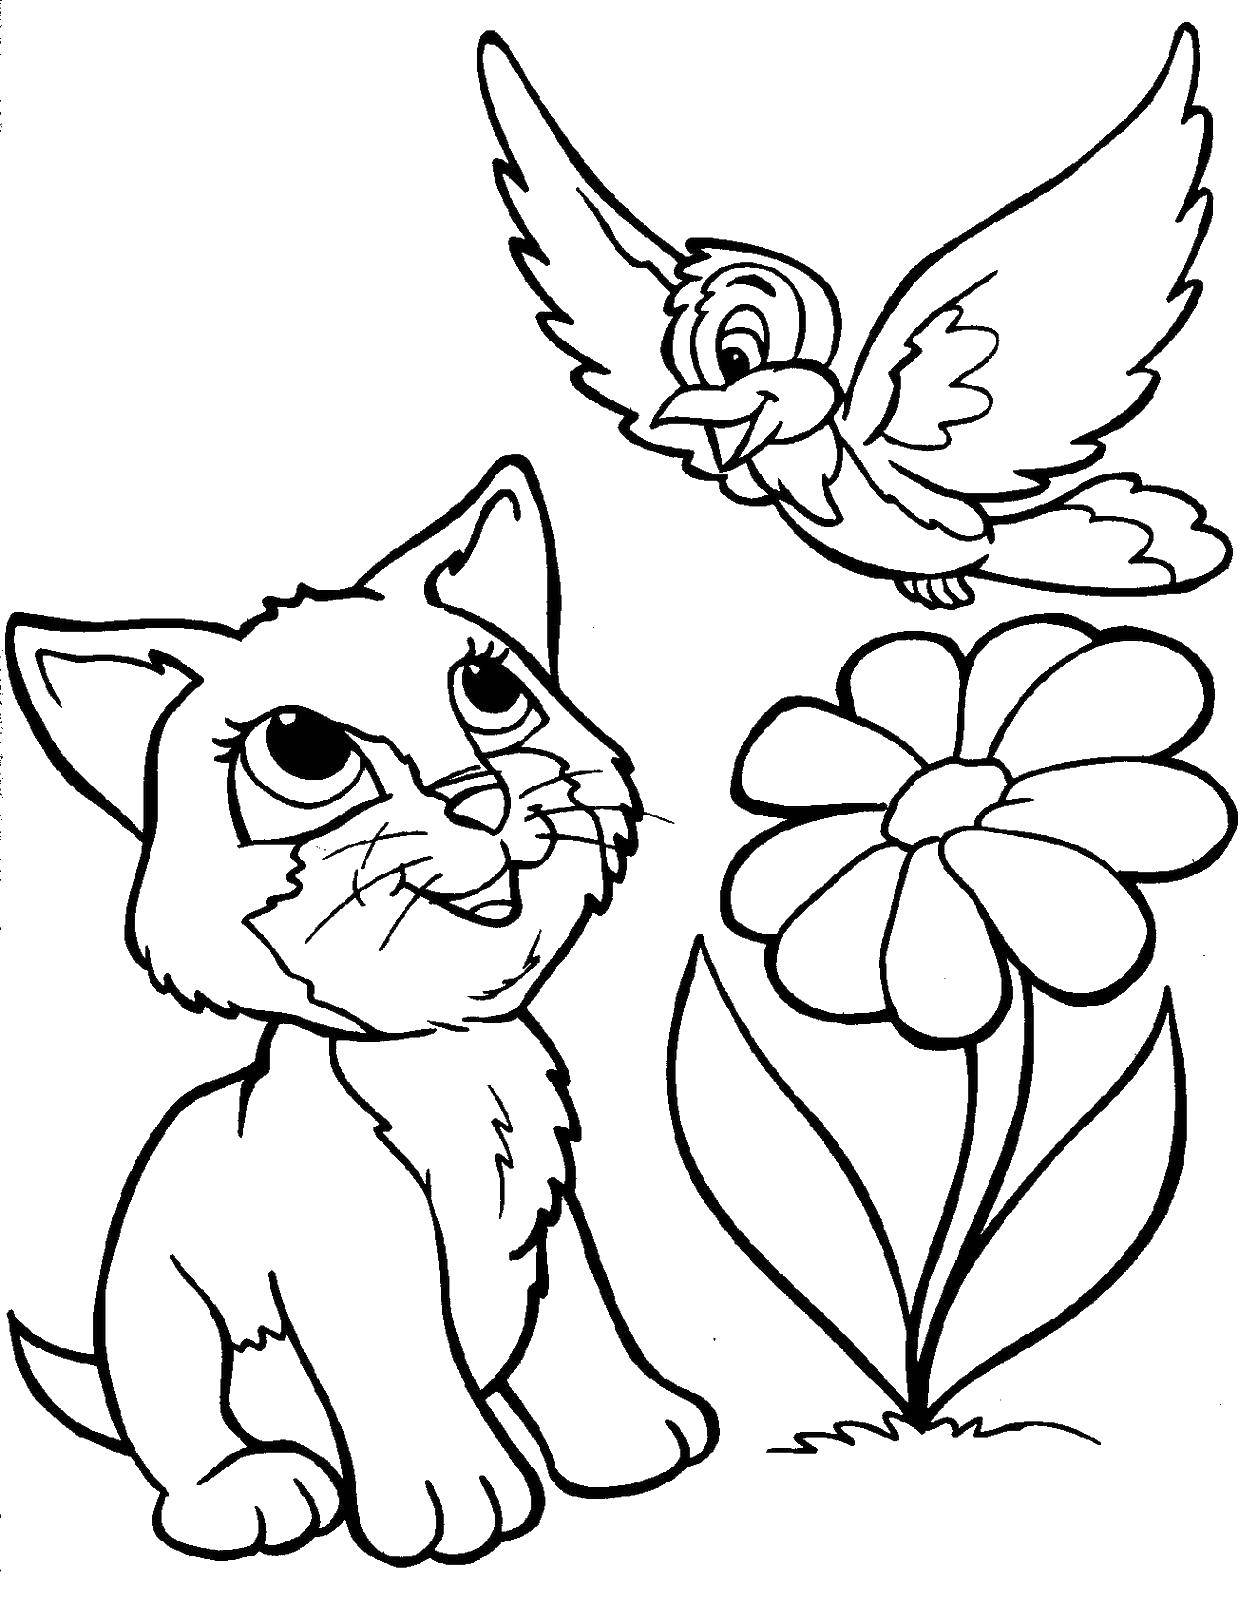 Coloring Cat welcomes bird. Category Coloring pages for kids. Tags:  Animals, kitten.